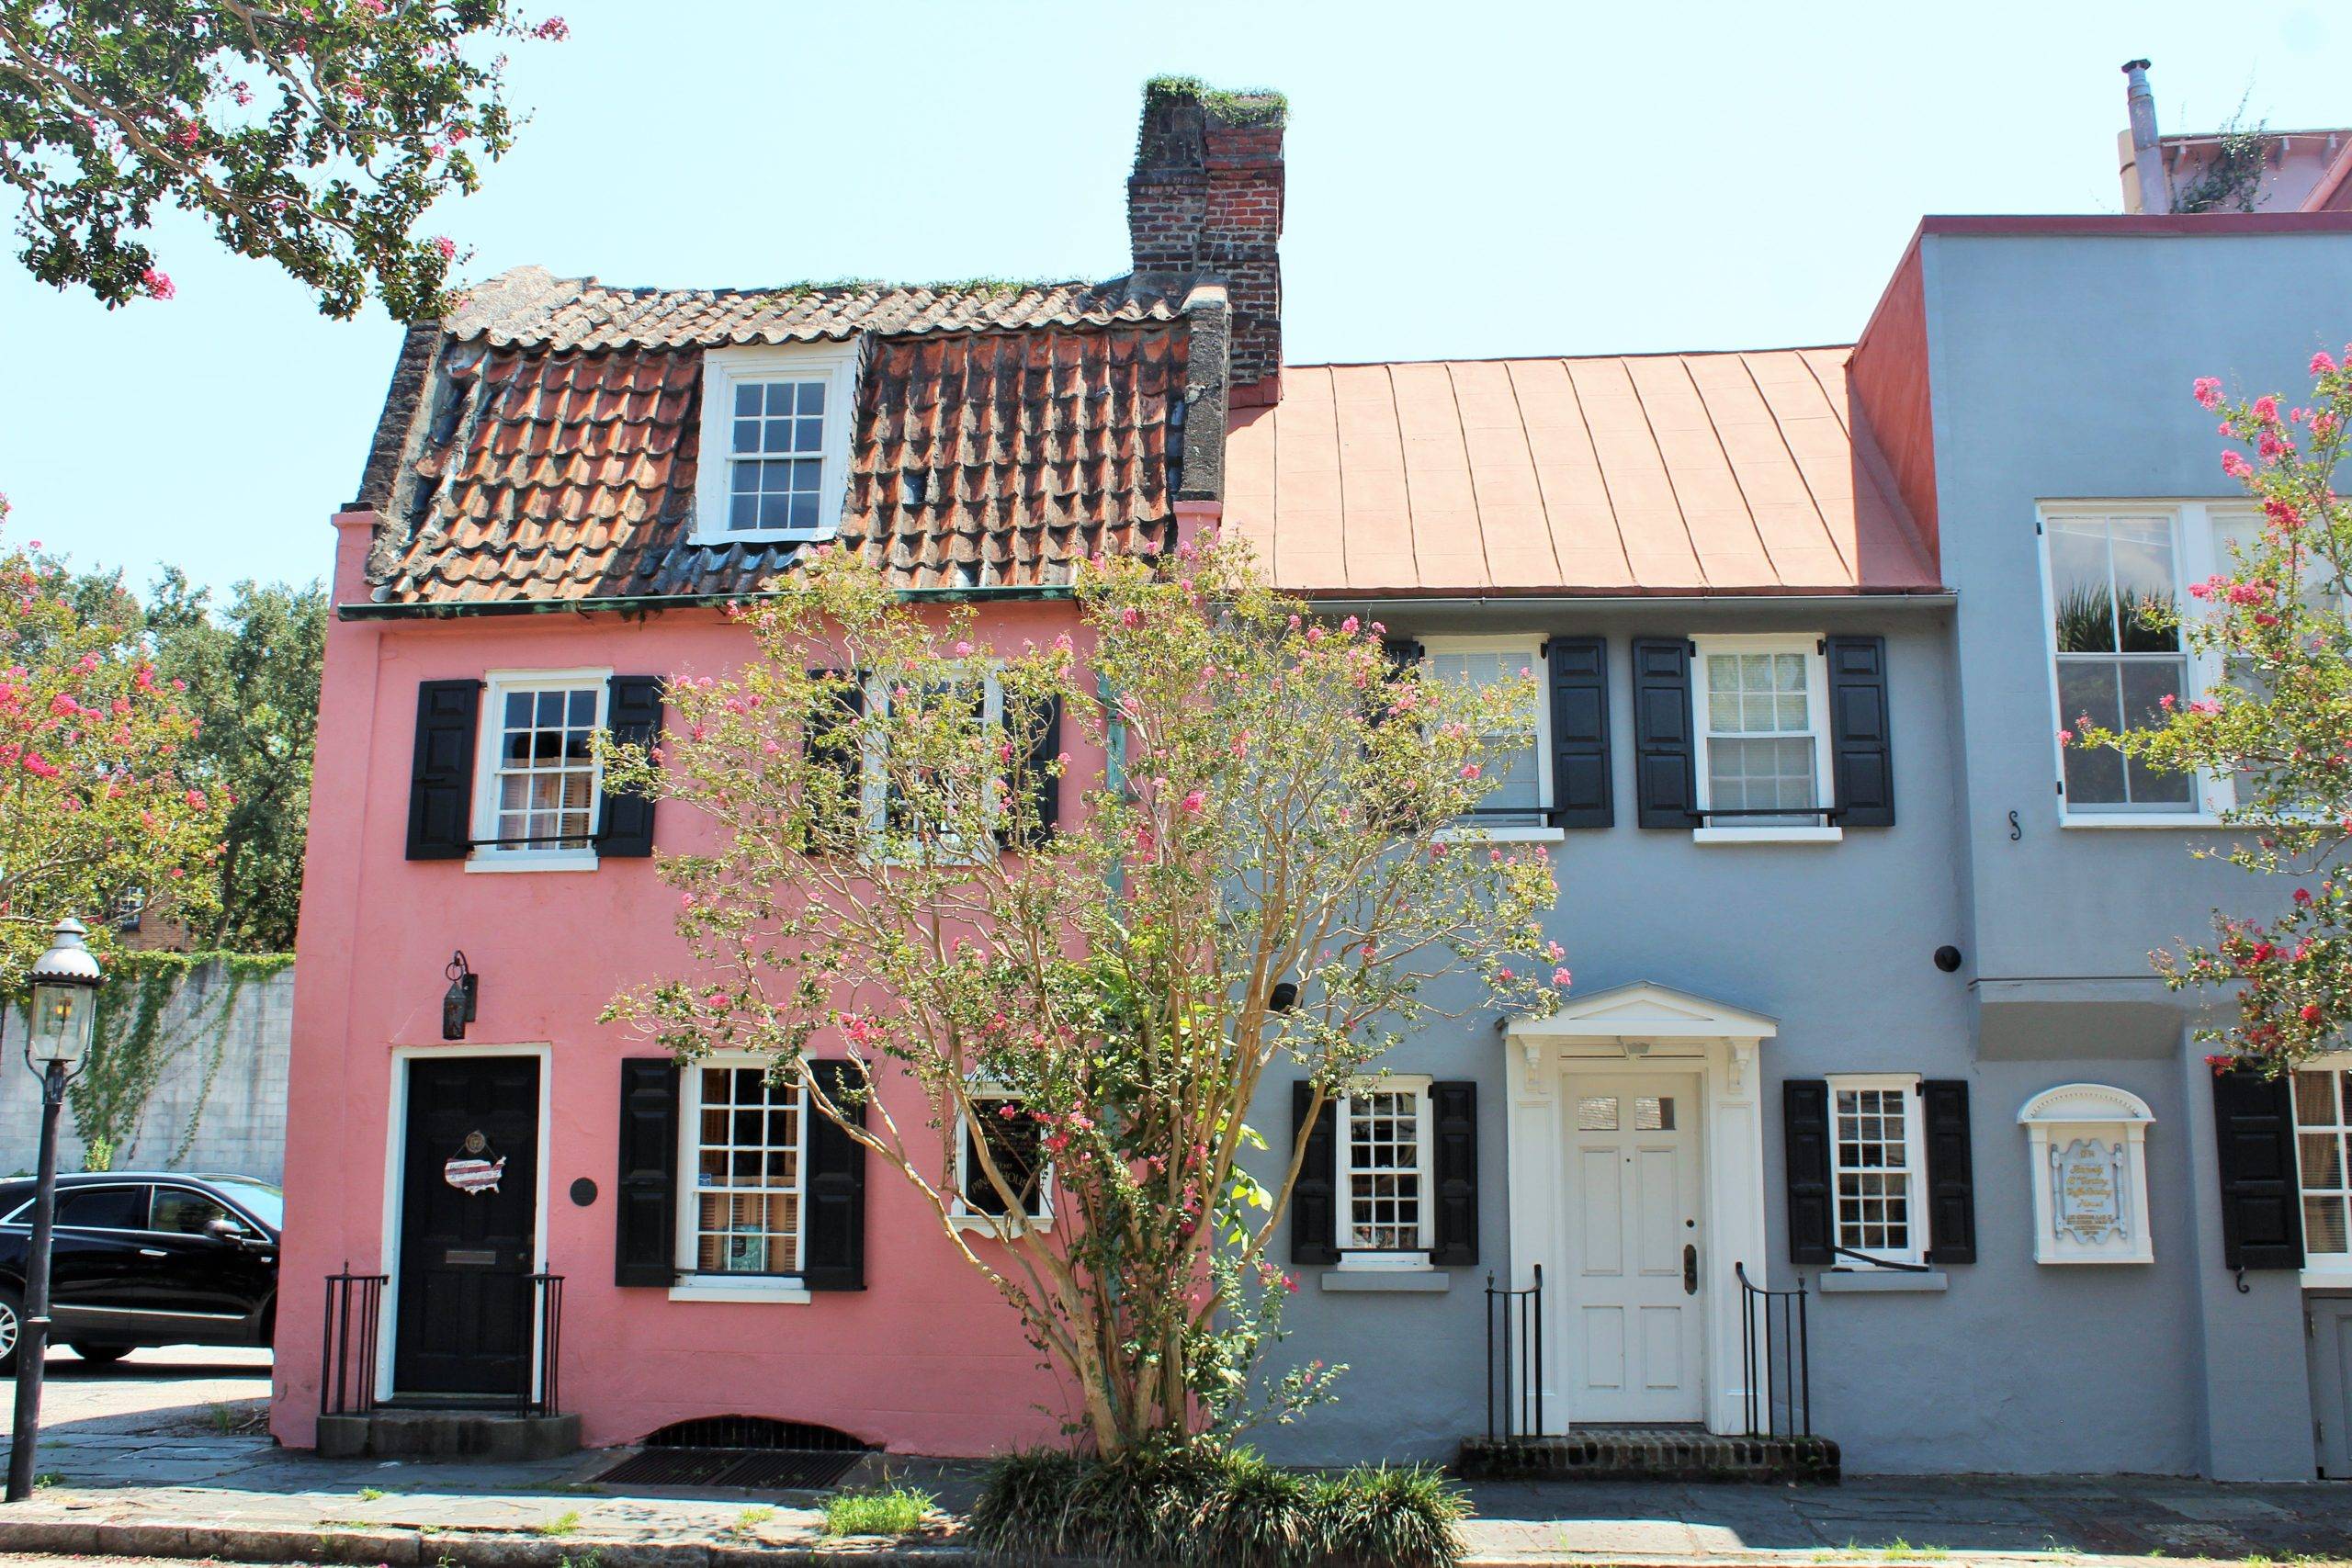 The smallest house in Charleston